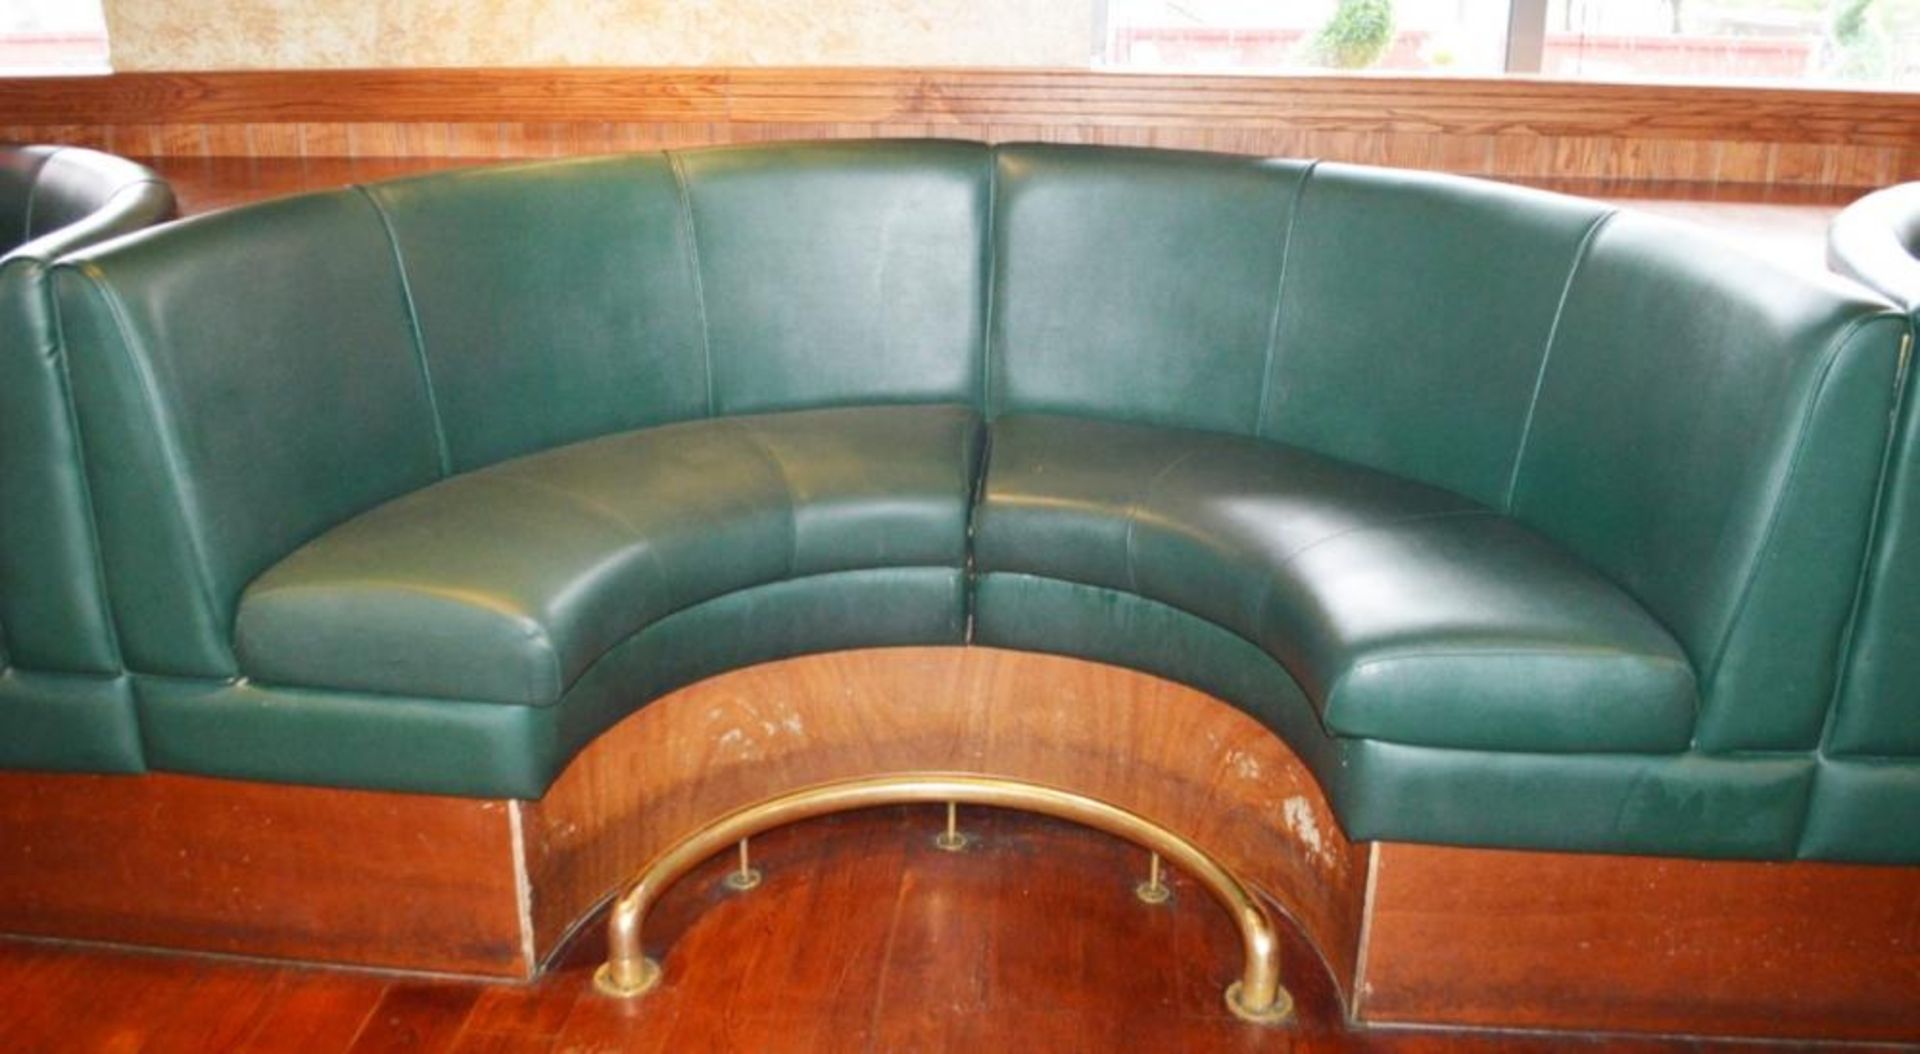 2 x Contemporary U Seating Booths With Green Faux Leather Upholstery and Brass Foot Rests - H105 x W - Image 5 of 6